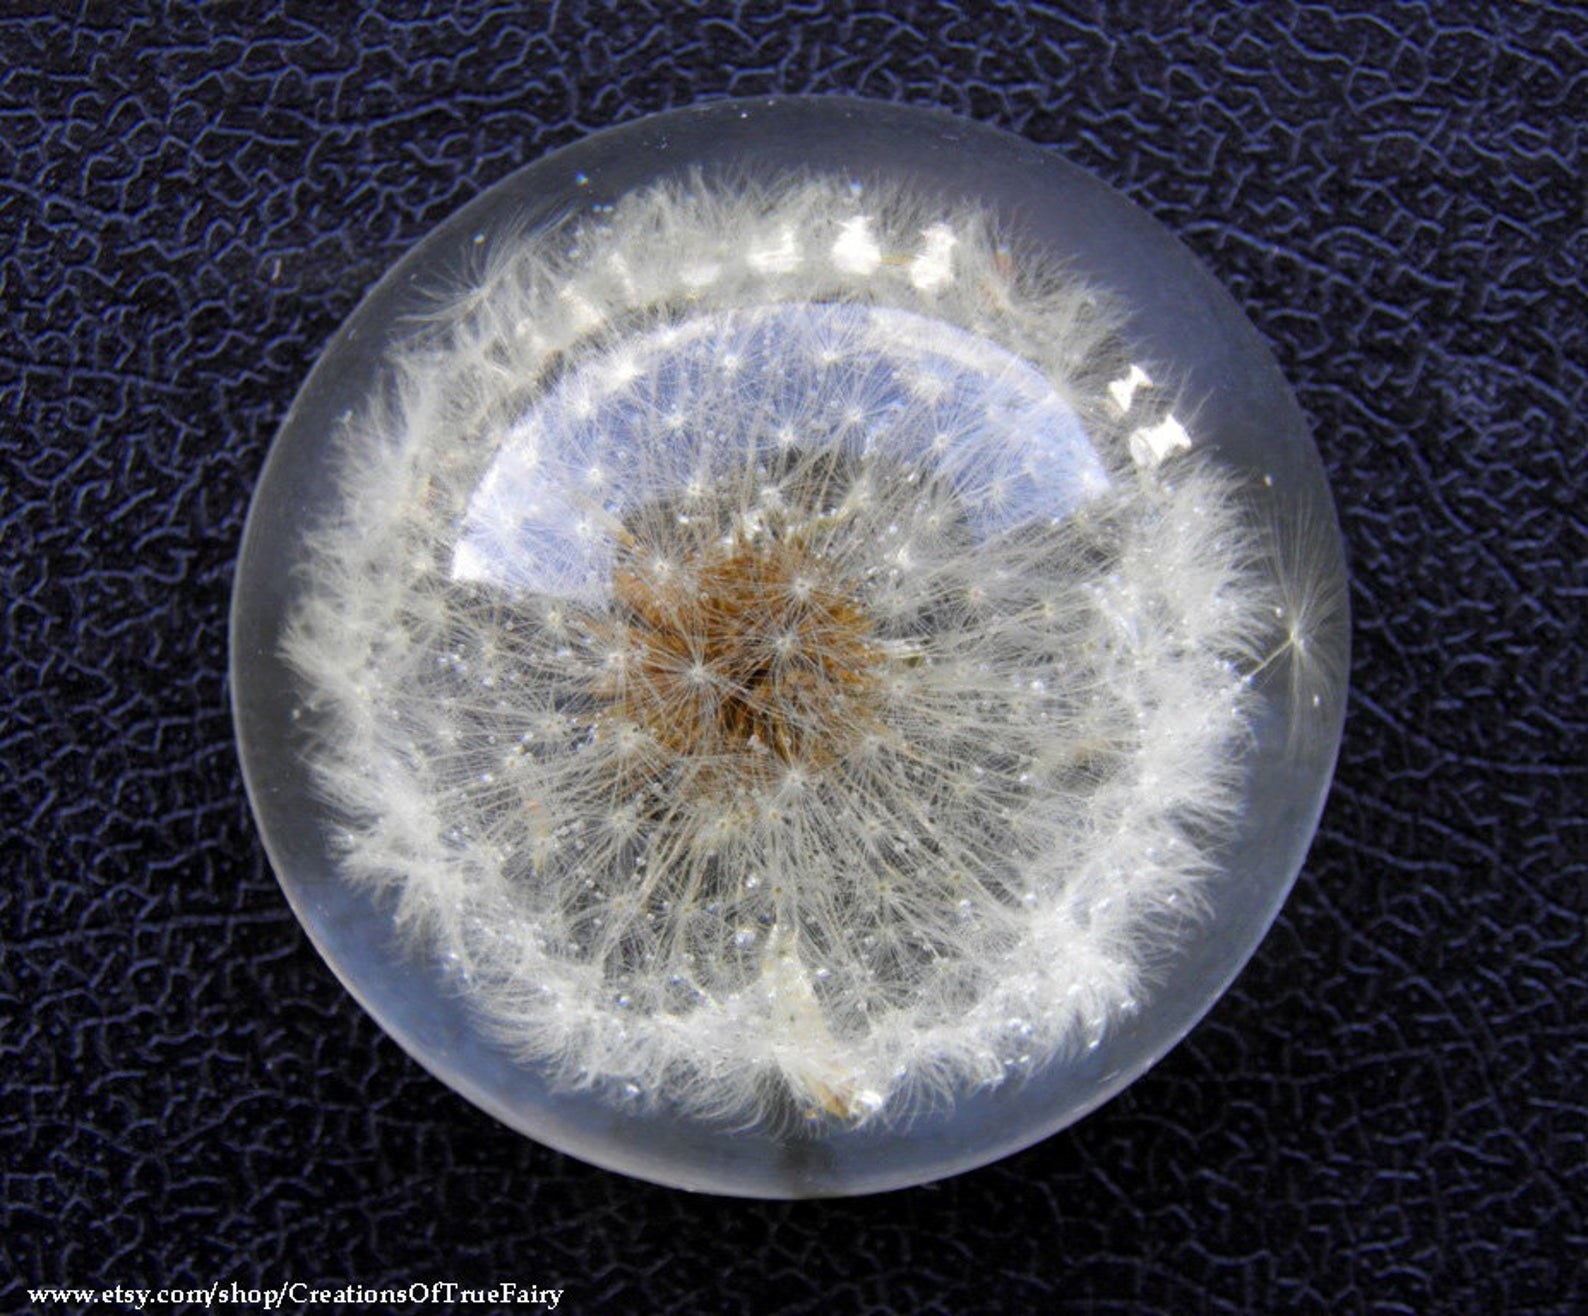 the small dandelion paperweight